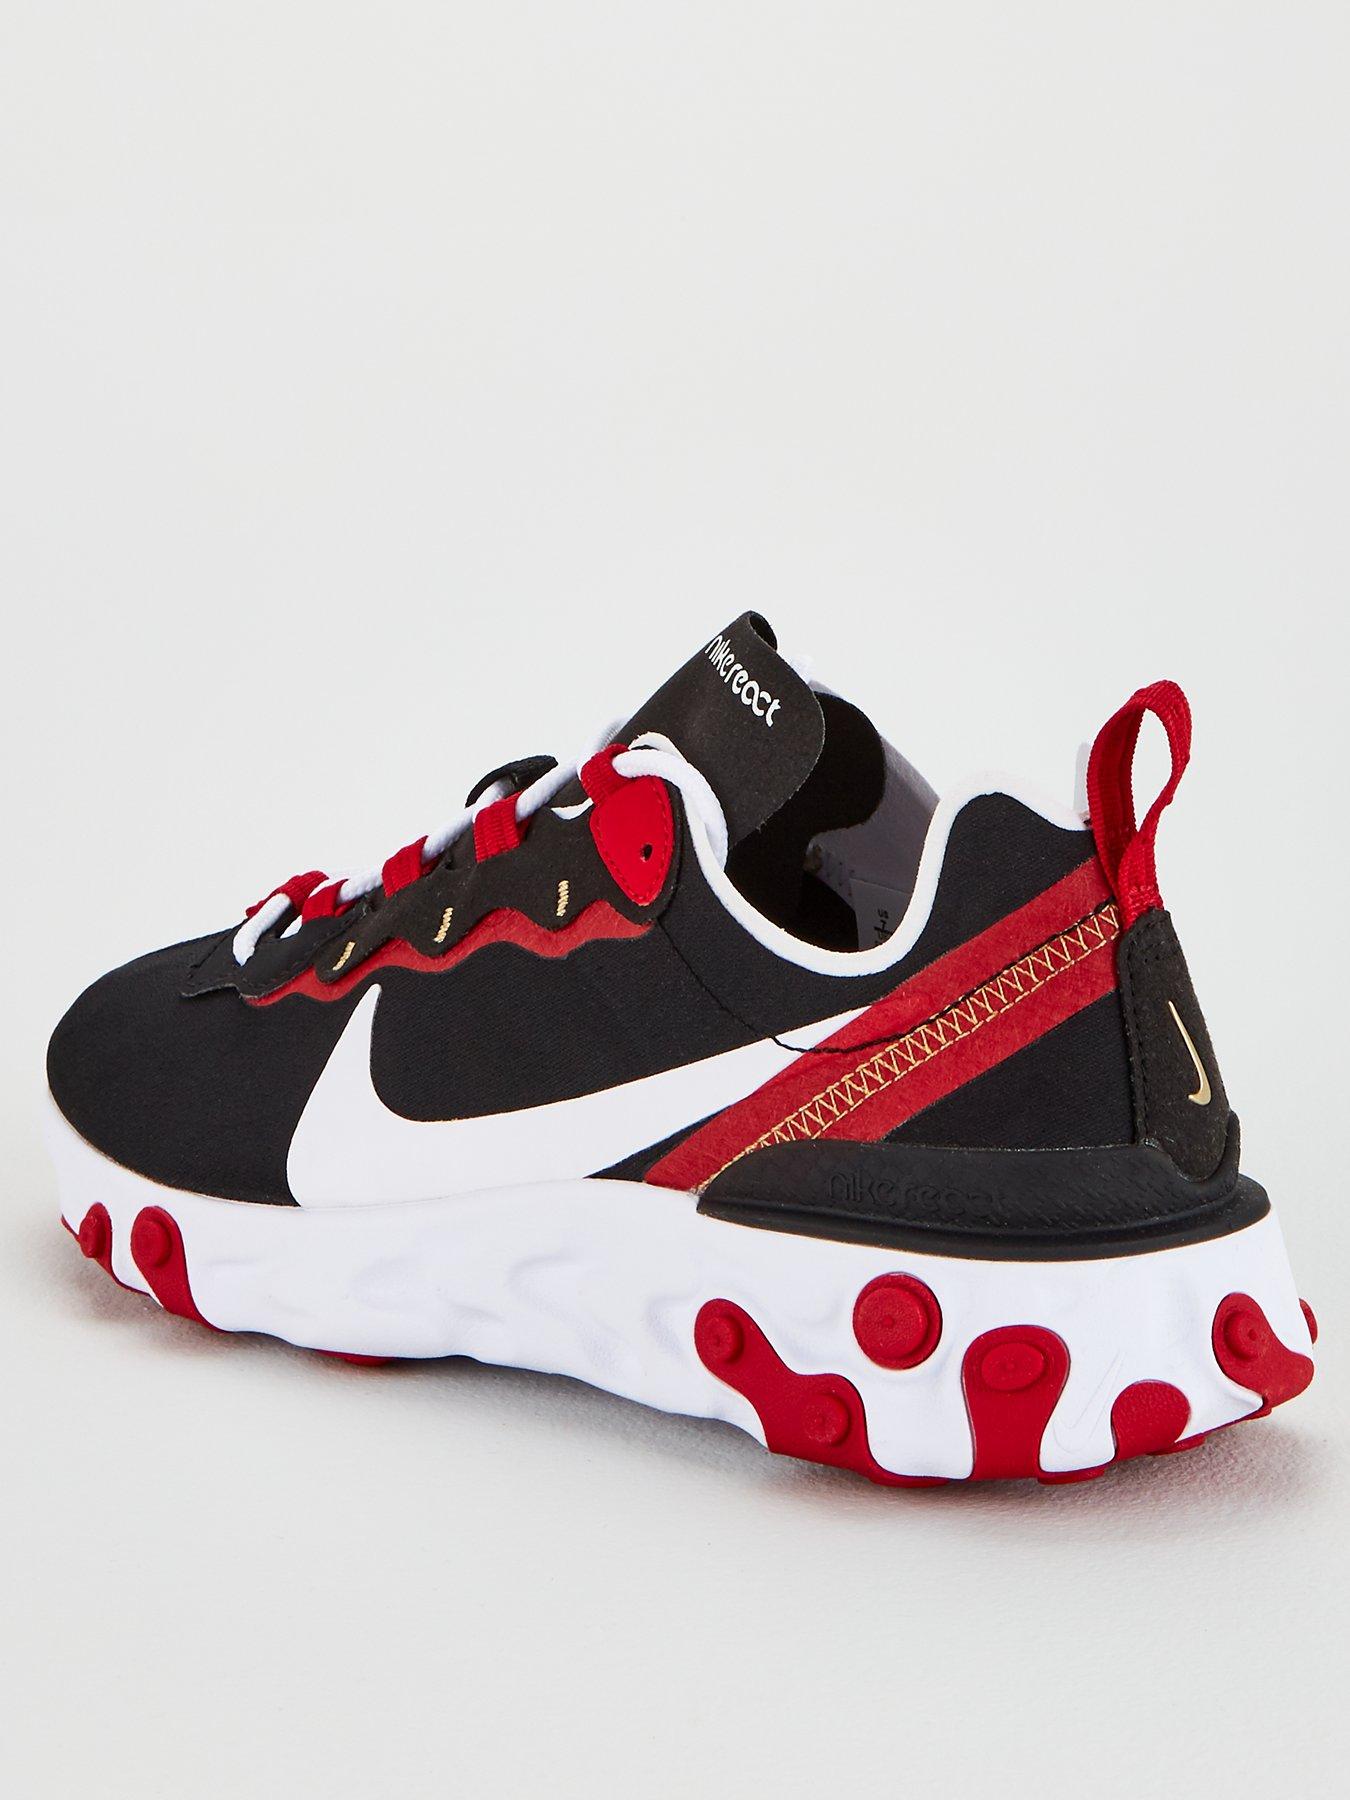 black and red reacts